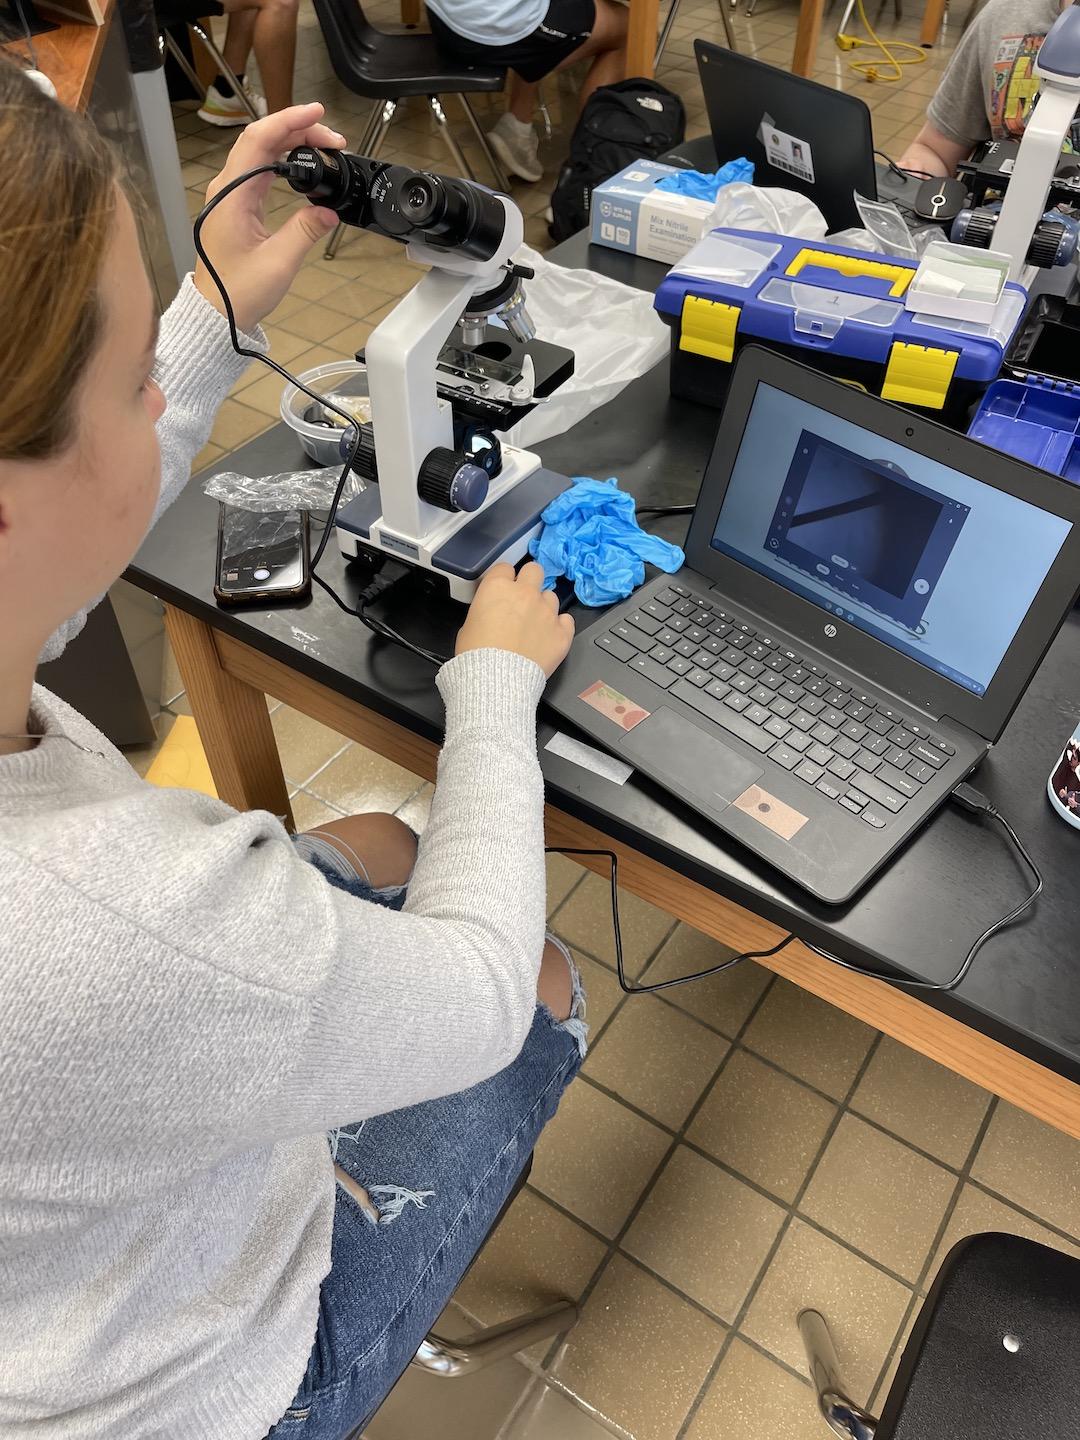 A student saves images from the microscope to her laptop